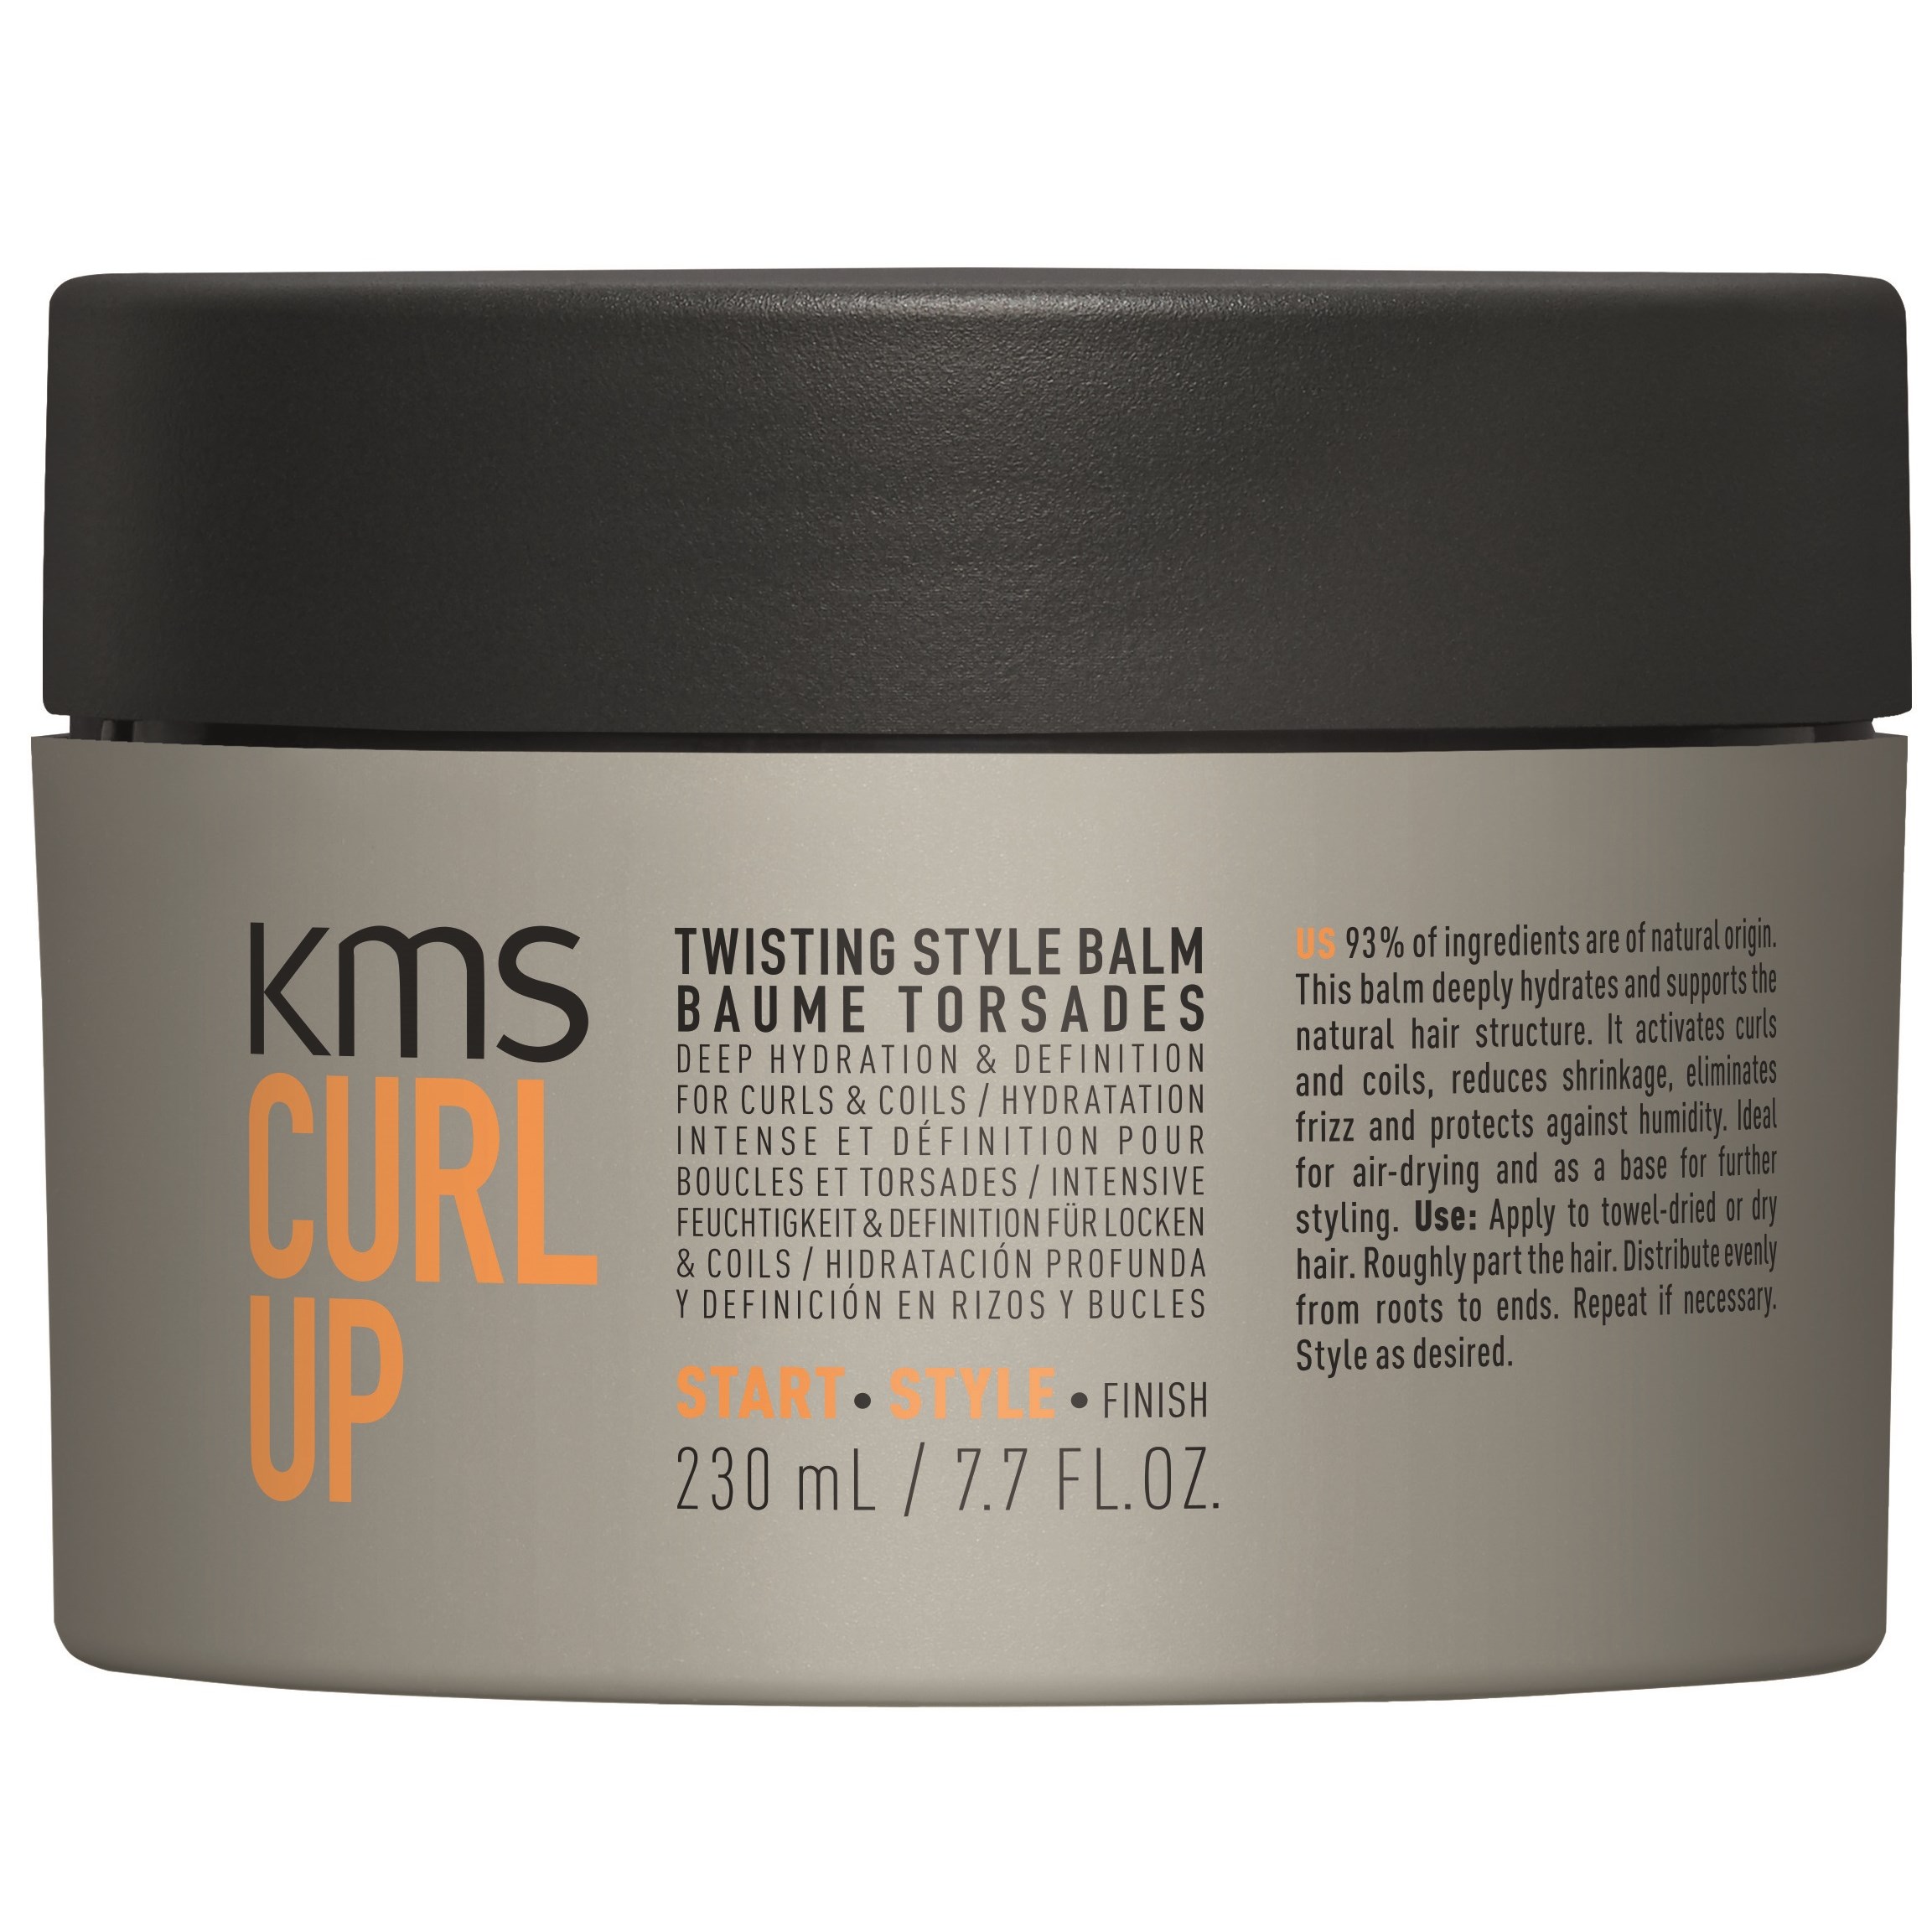 KMS CurlUp STYLE Twisting Style Balm 230 ml